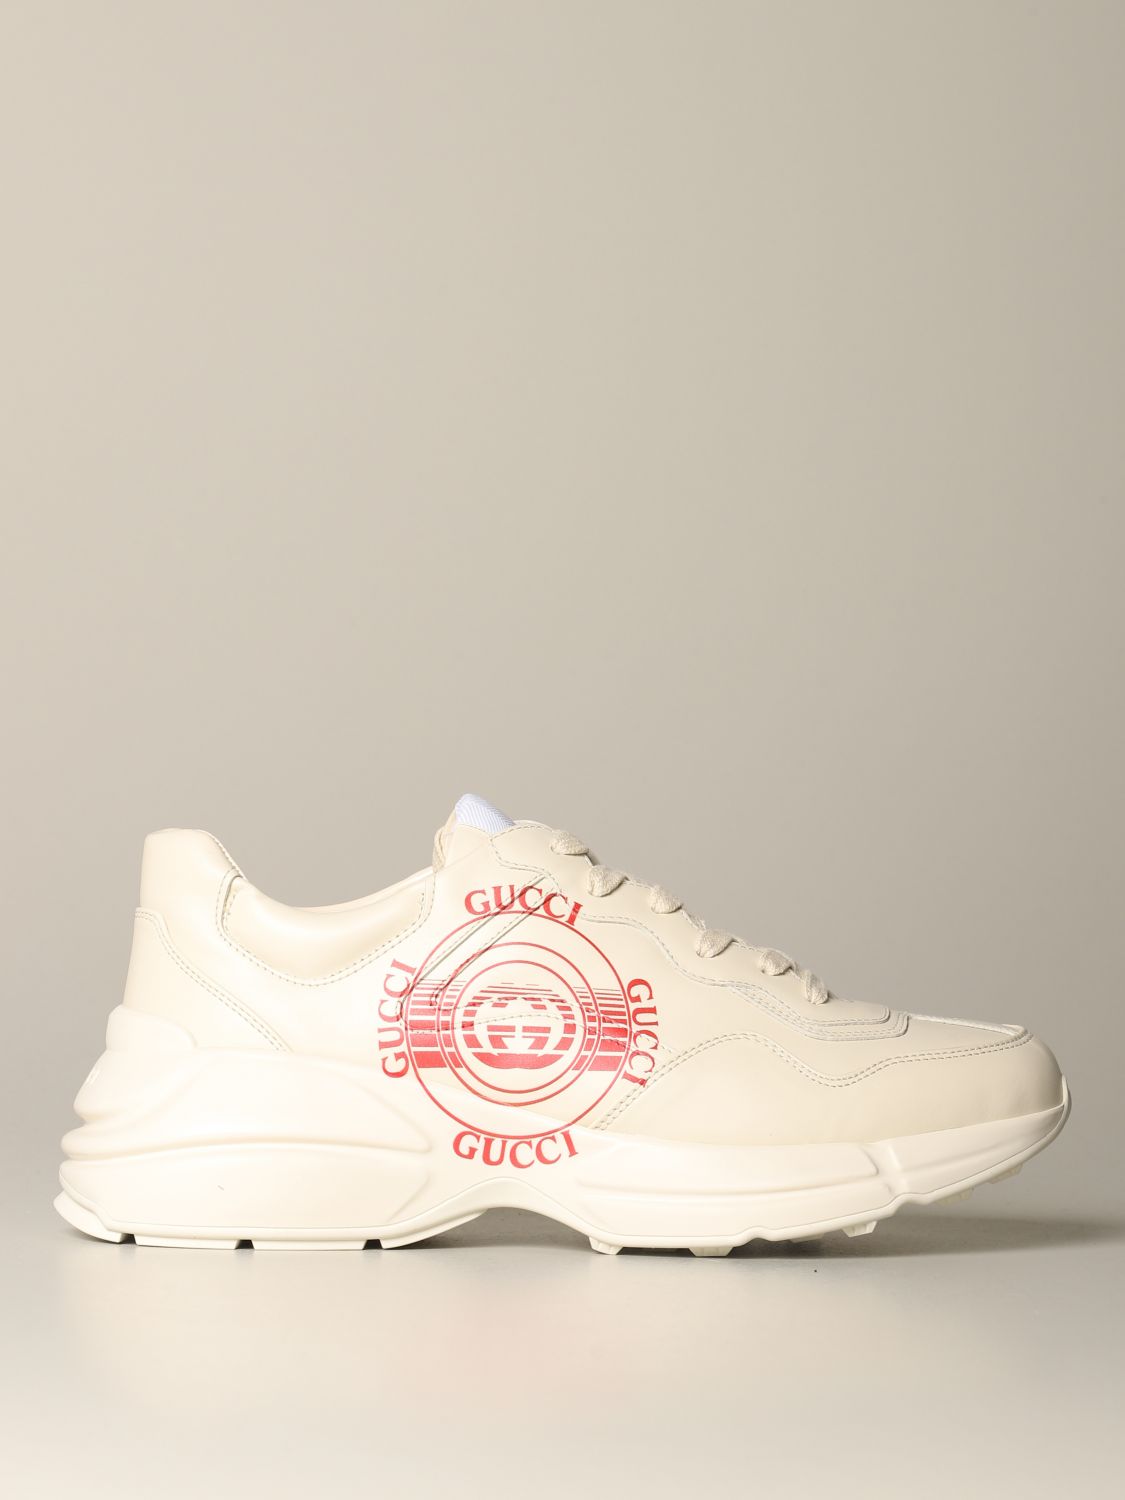 gucci rhyton sneakers sizing